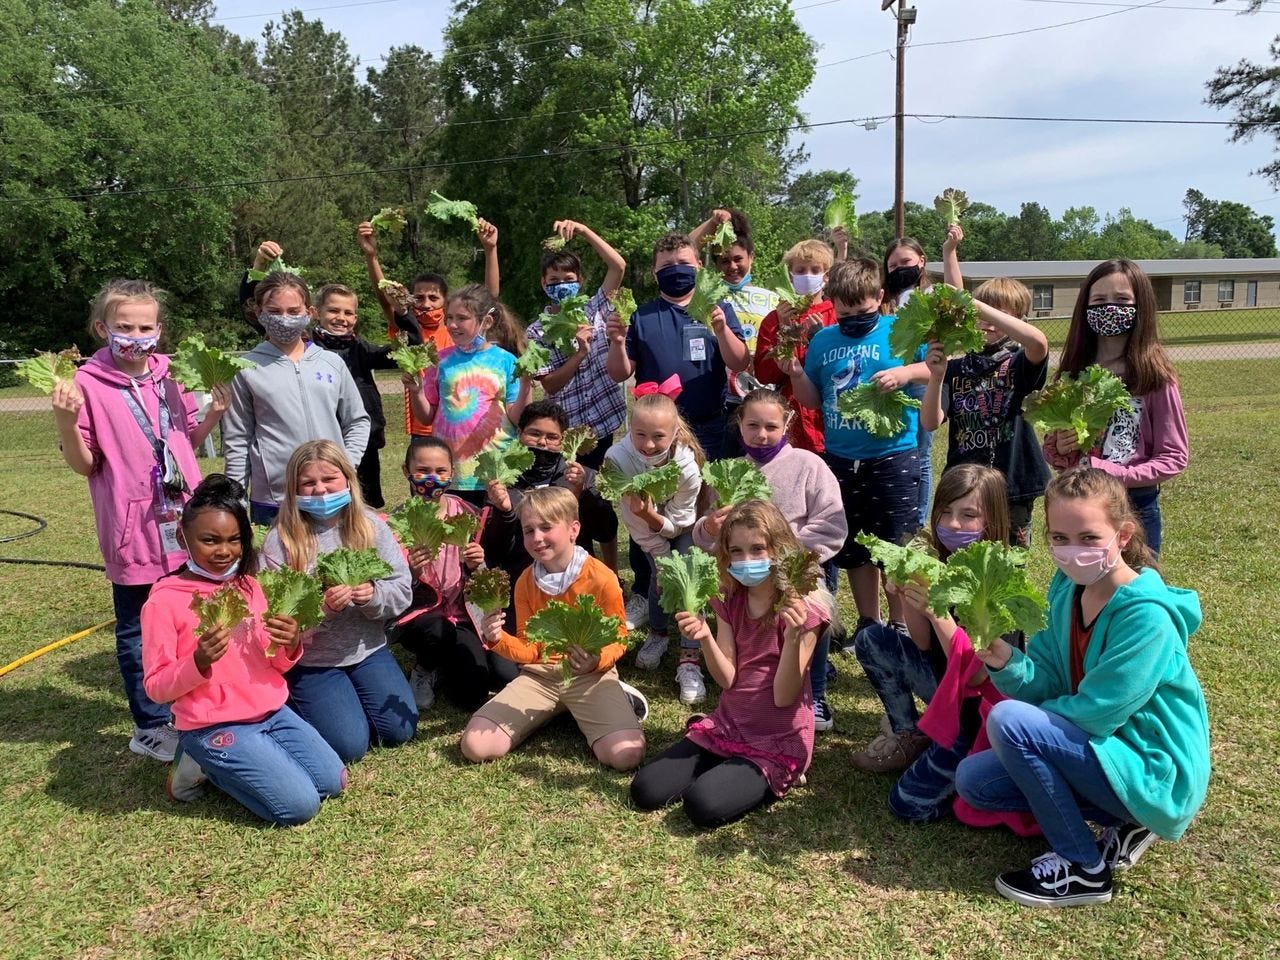 The DeRidder Ingevity plant made a donation to the Rosepine Elementary School Outdoor STEM Lab.